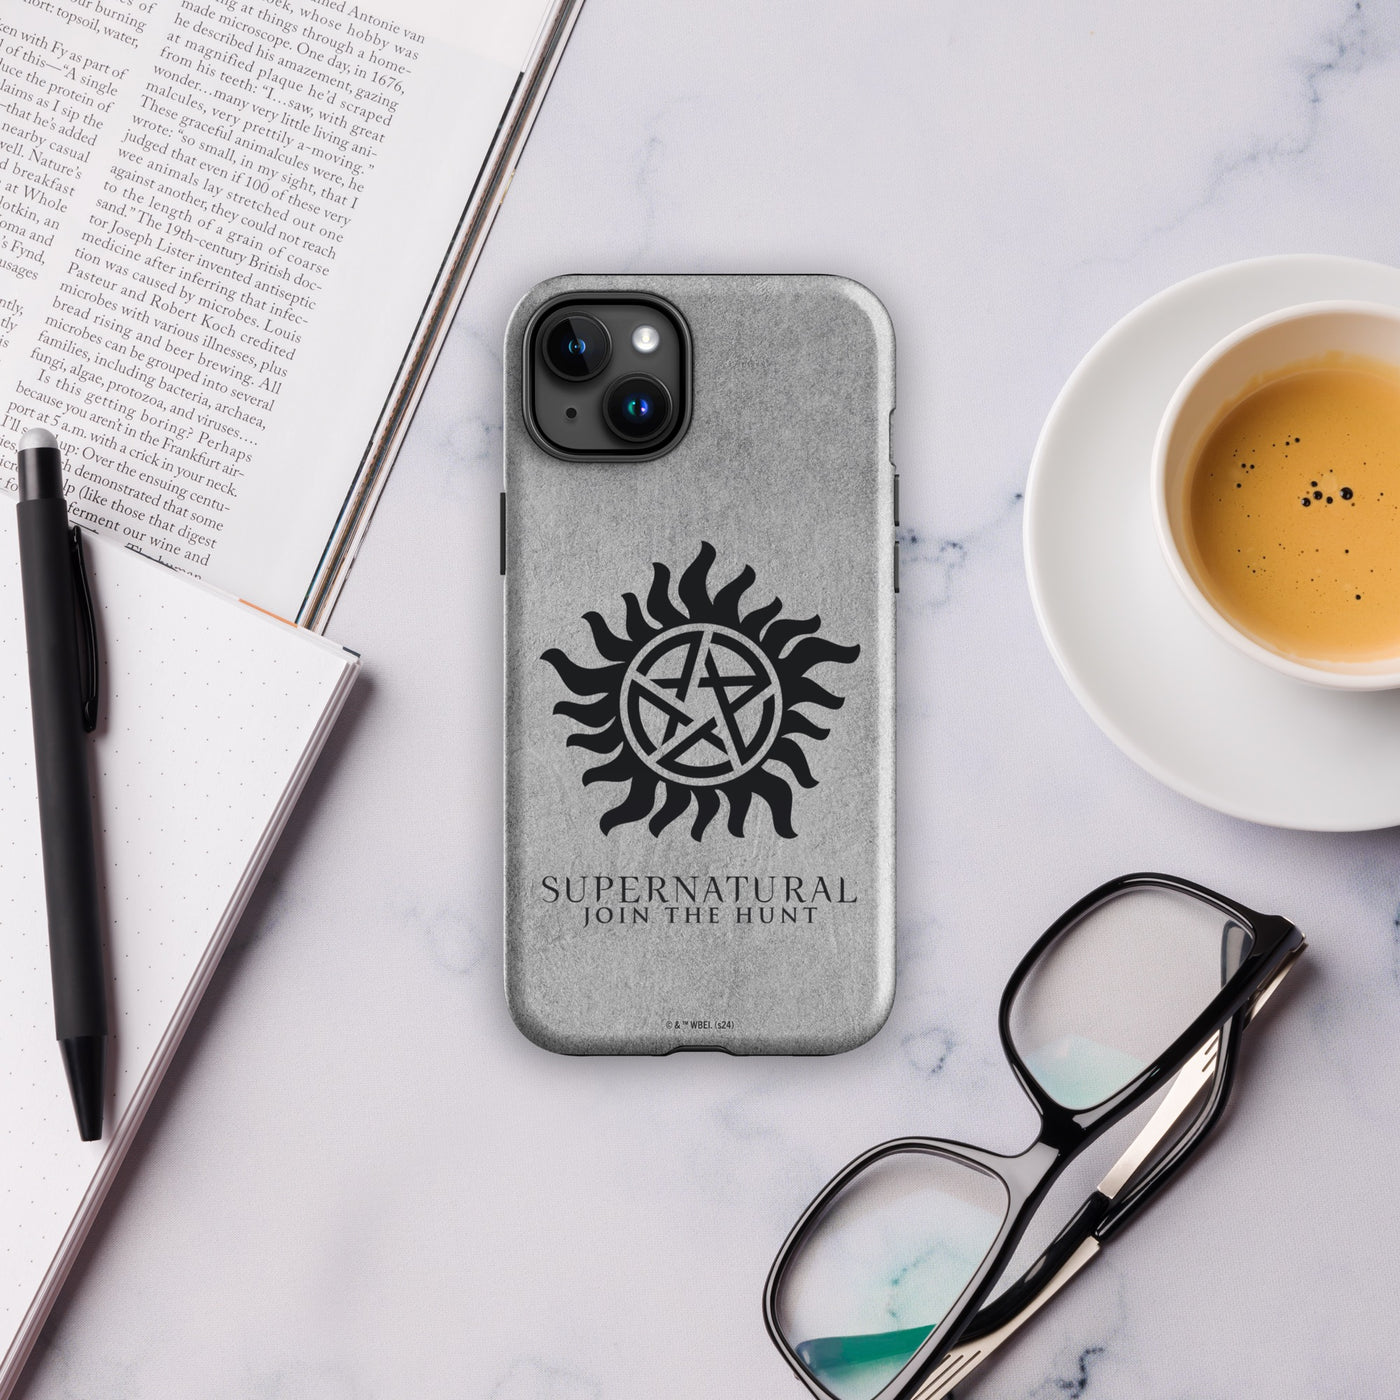 Supernatural Protection Tattoo iPhone Tough Case